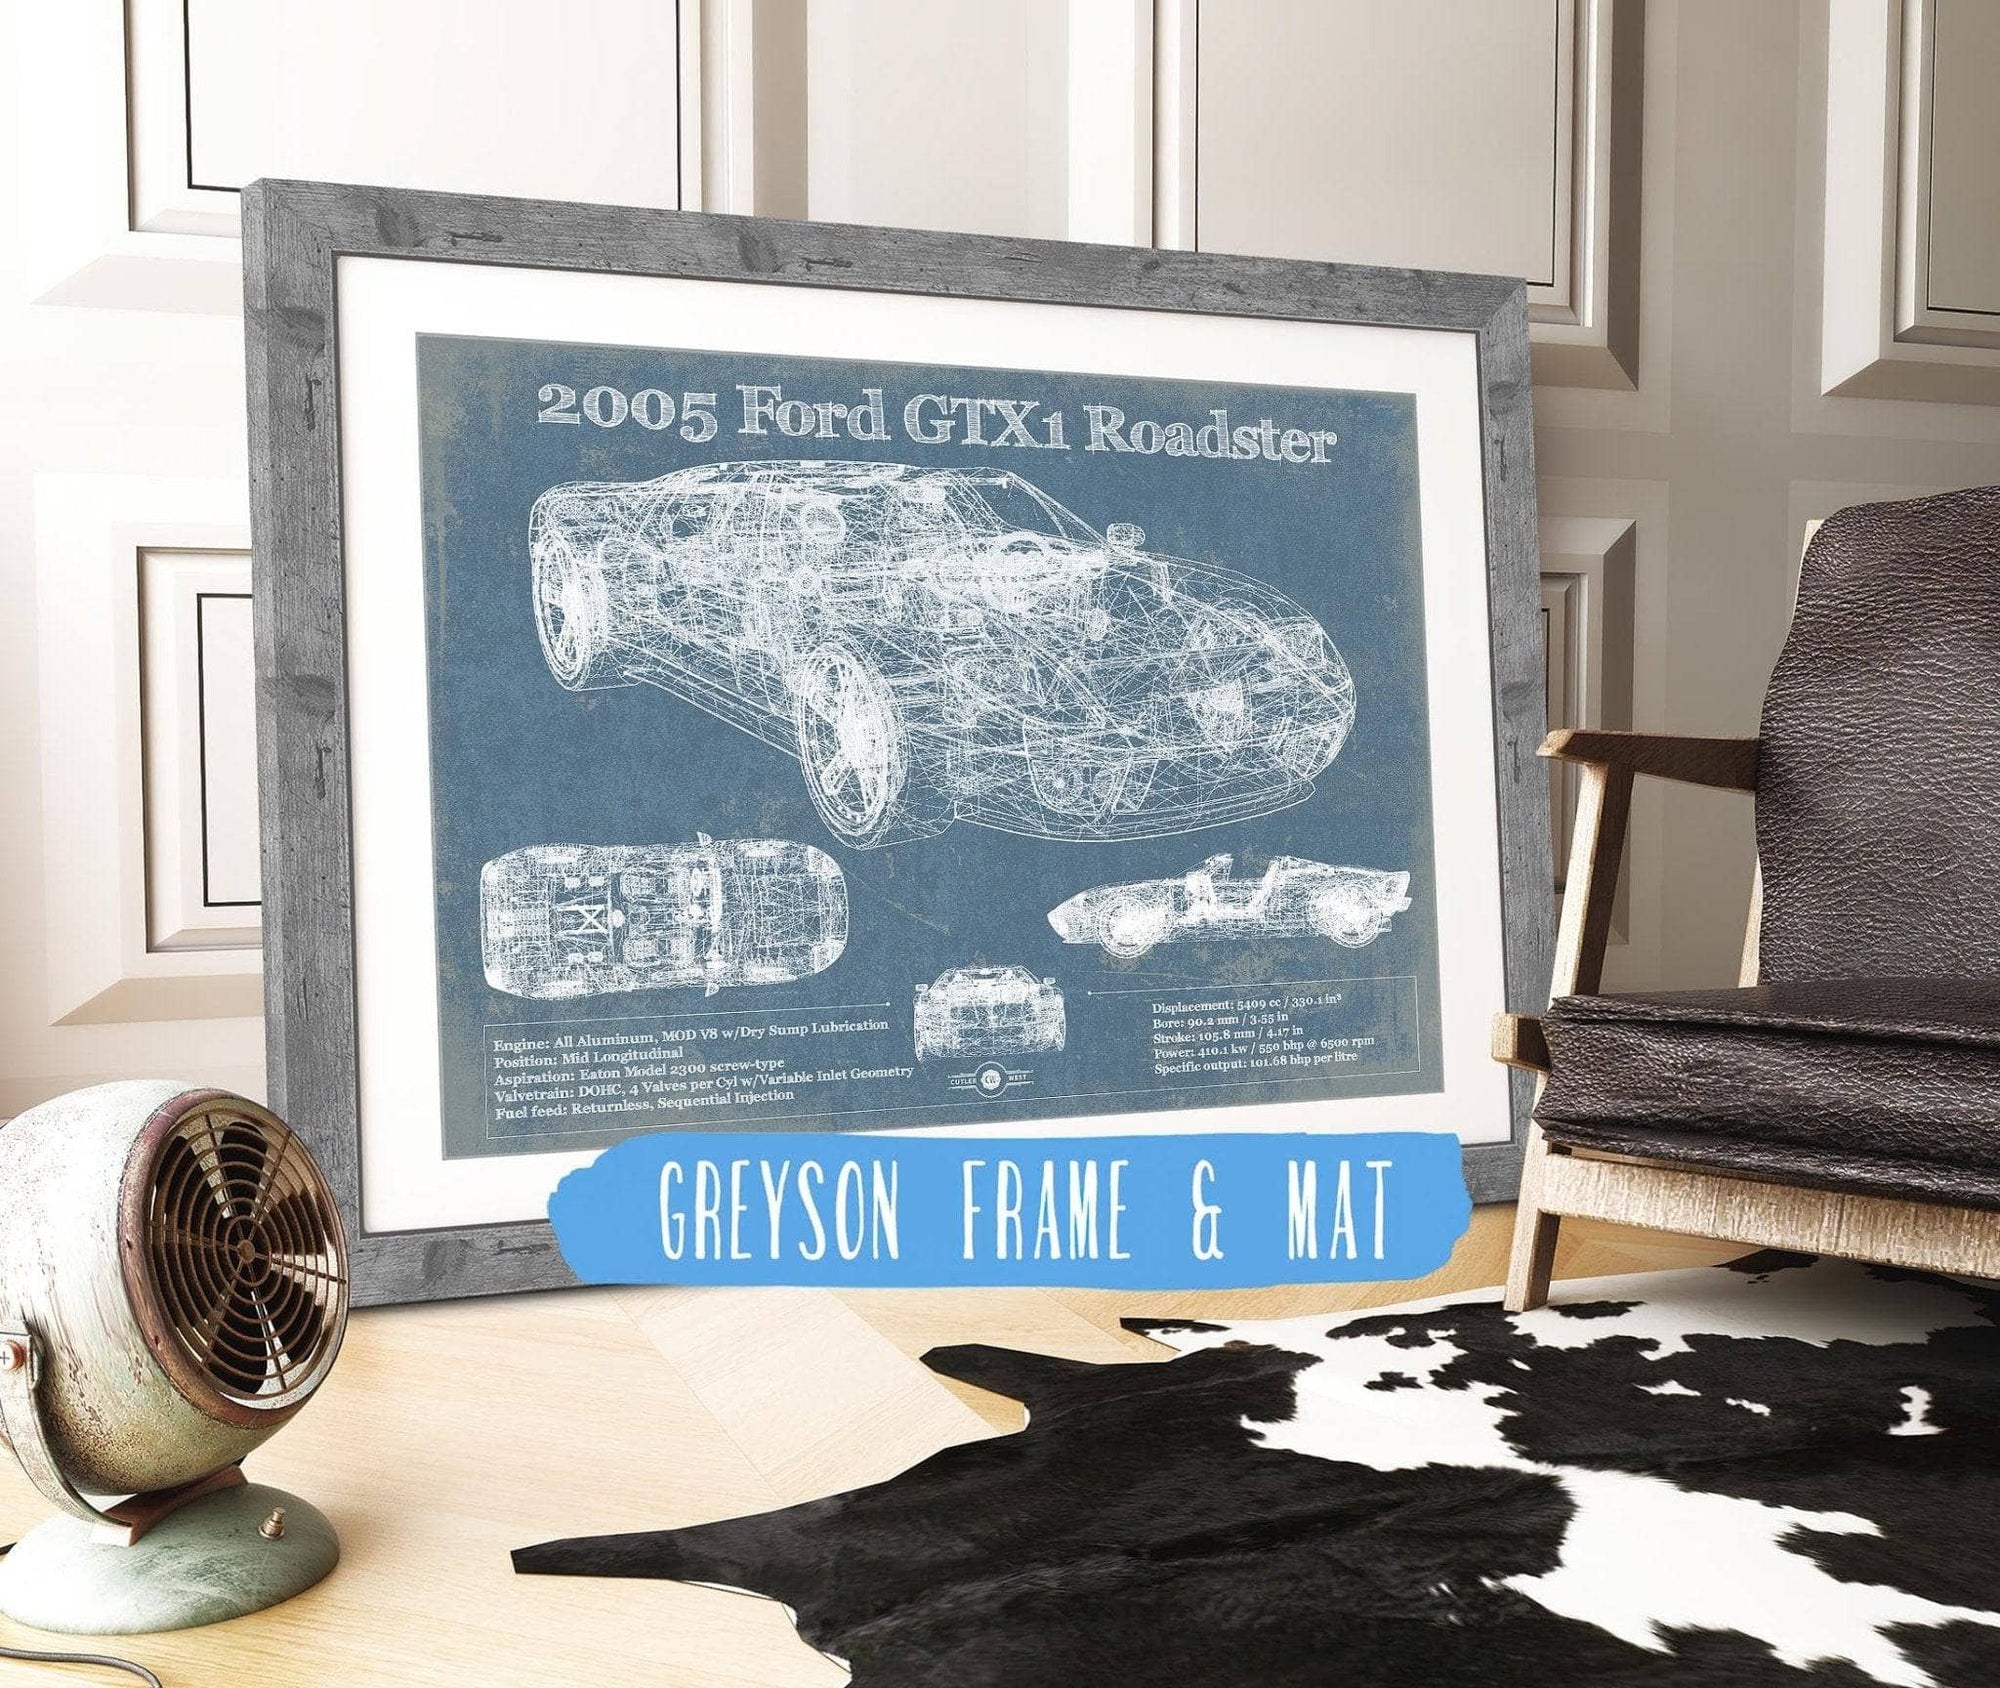 Cutler West Ford Collection 14" x 11" / Greyson Frame & Mat 2005 Ford GTX1 Roadster Vintage Blueprint Auto Print 933350037_17742